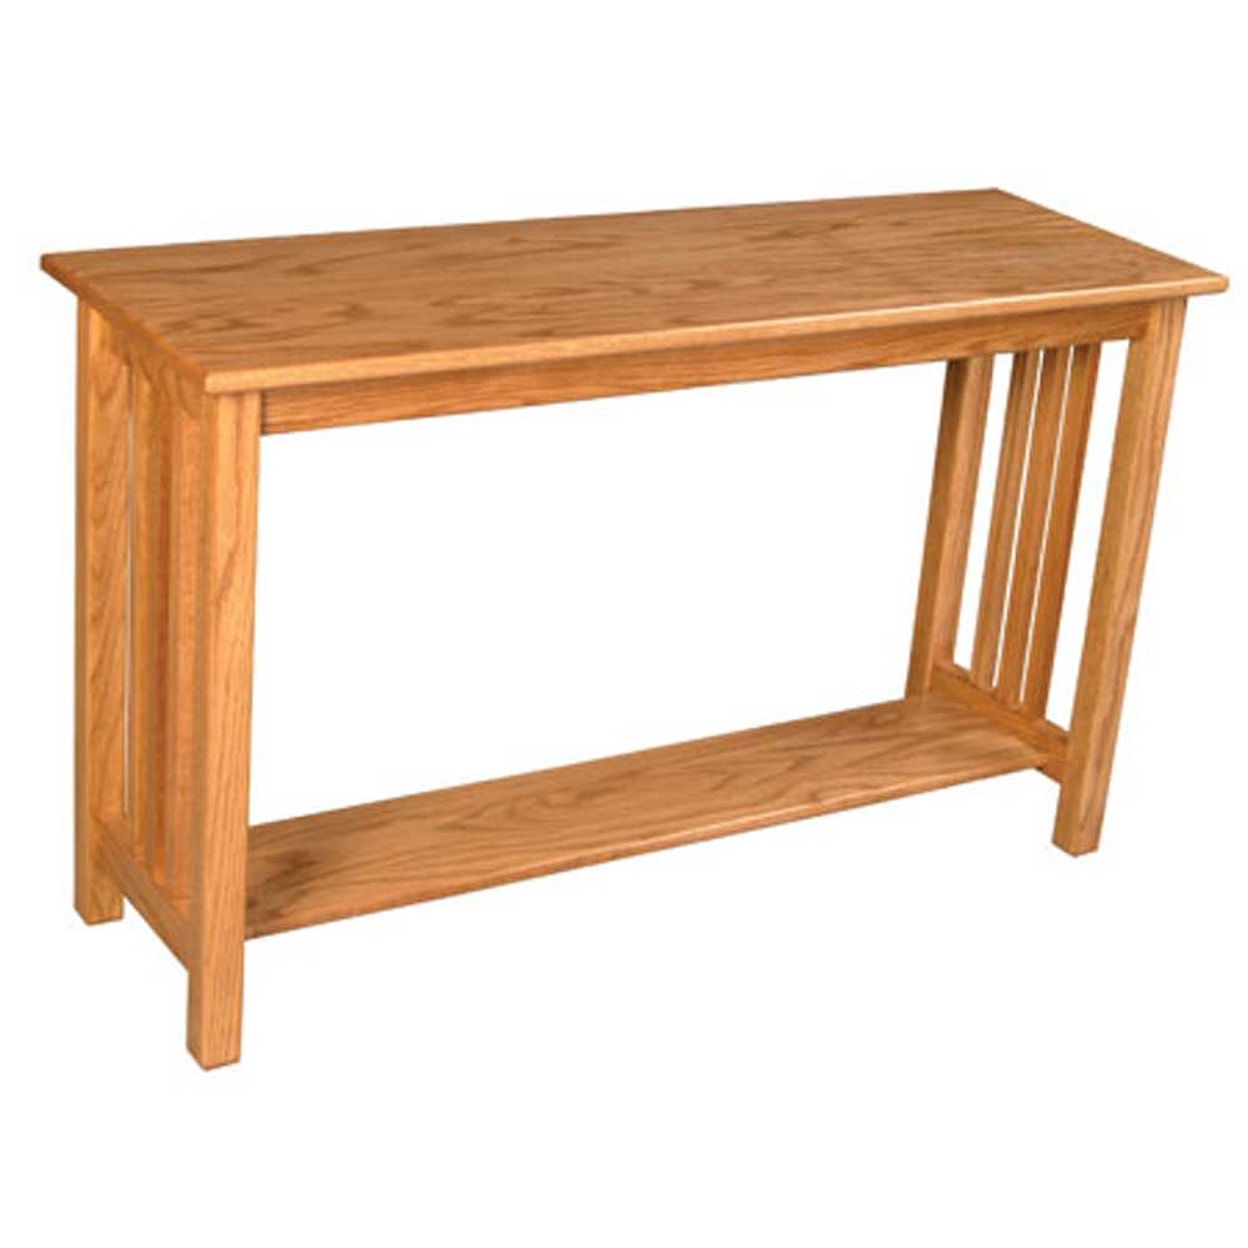 Simply Amish Mission Amish Sofa Table